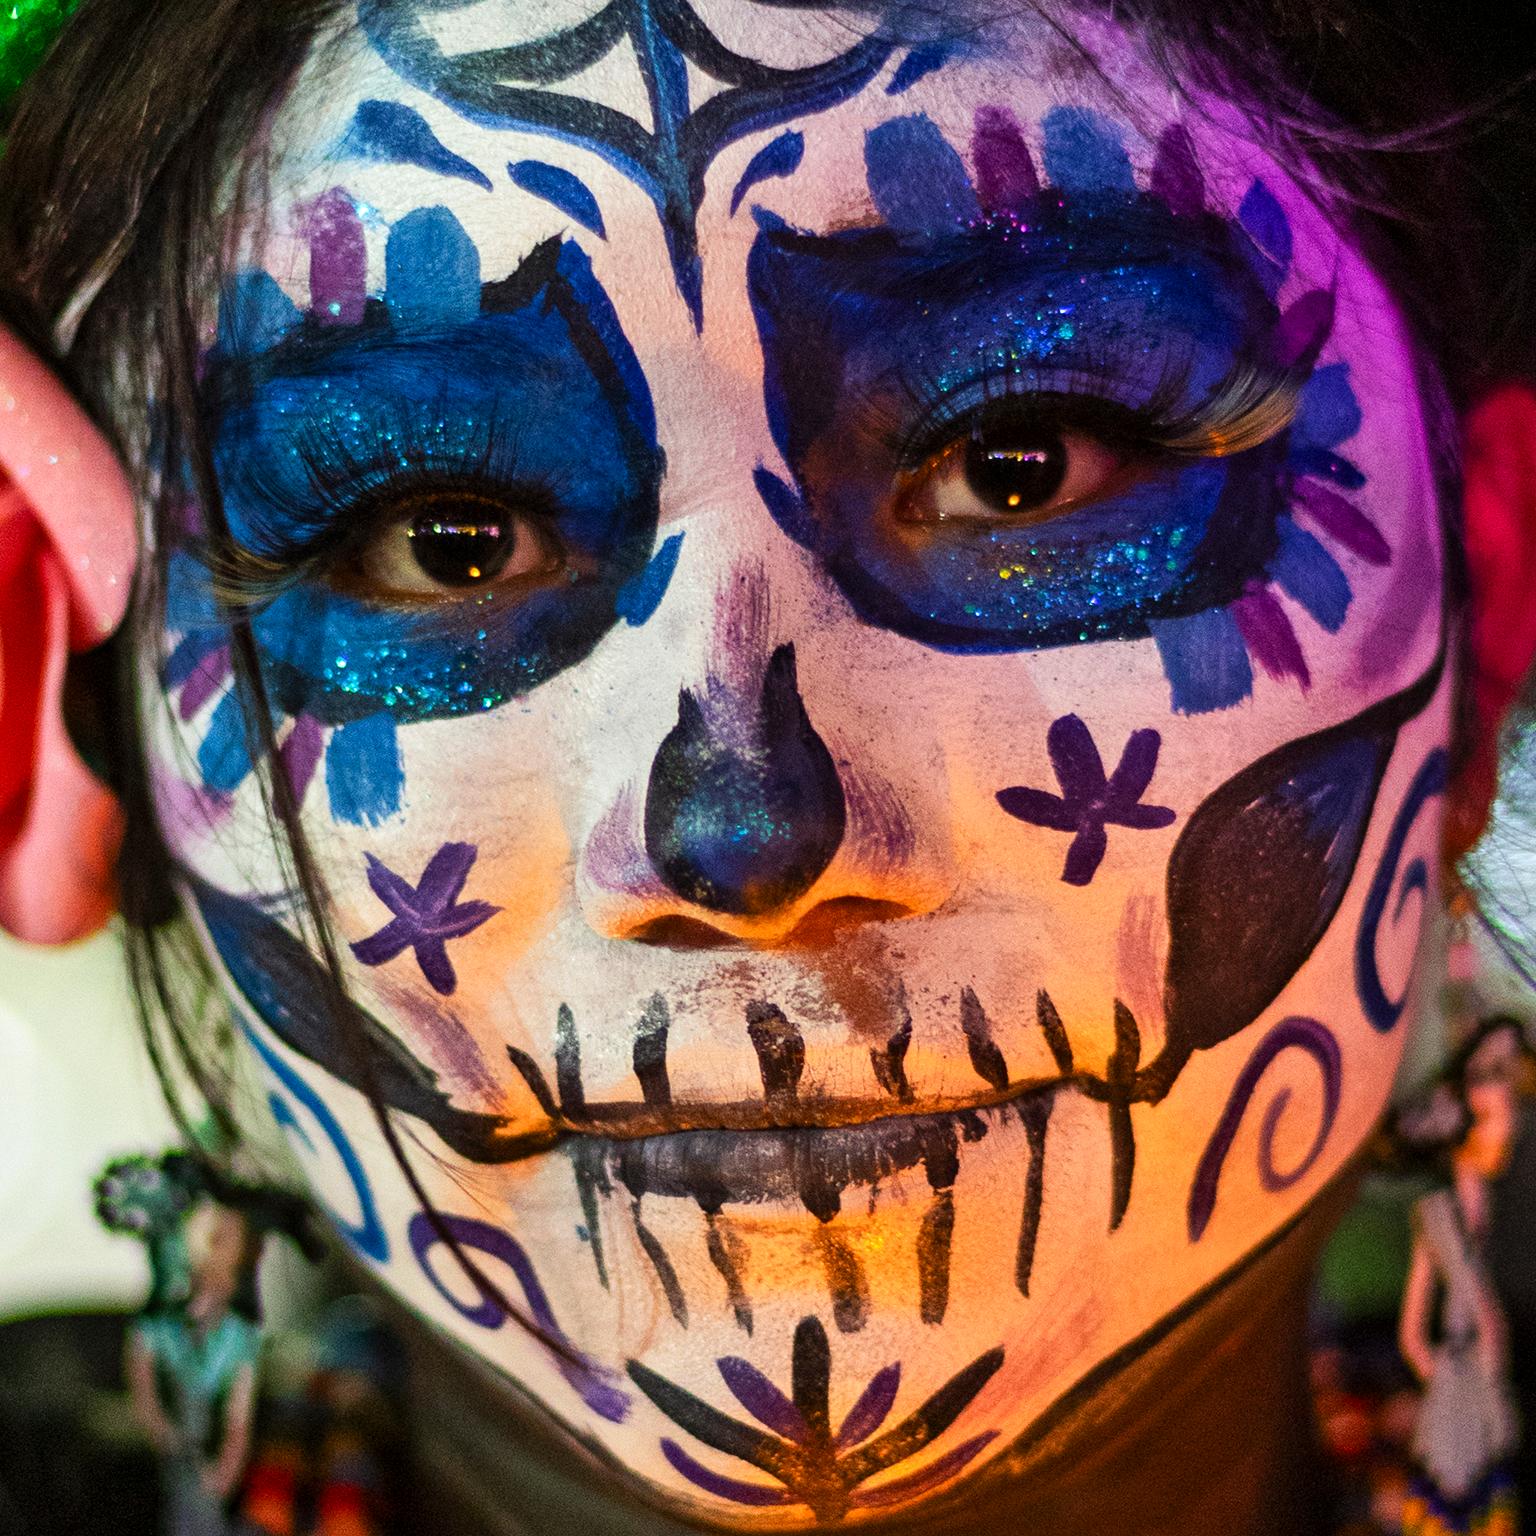 “ I wait for you evermore”, Day of the Dead, Dia de los Muertos, Mexico, 2023 - Photograph by  Cosmo Condina